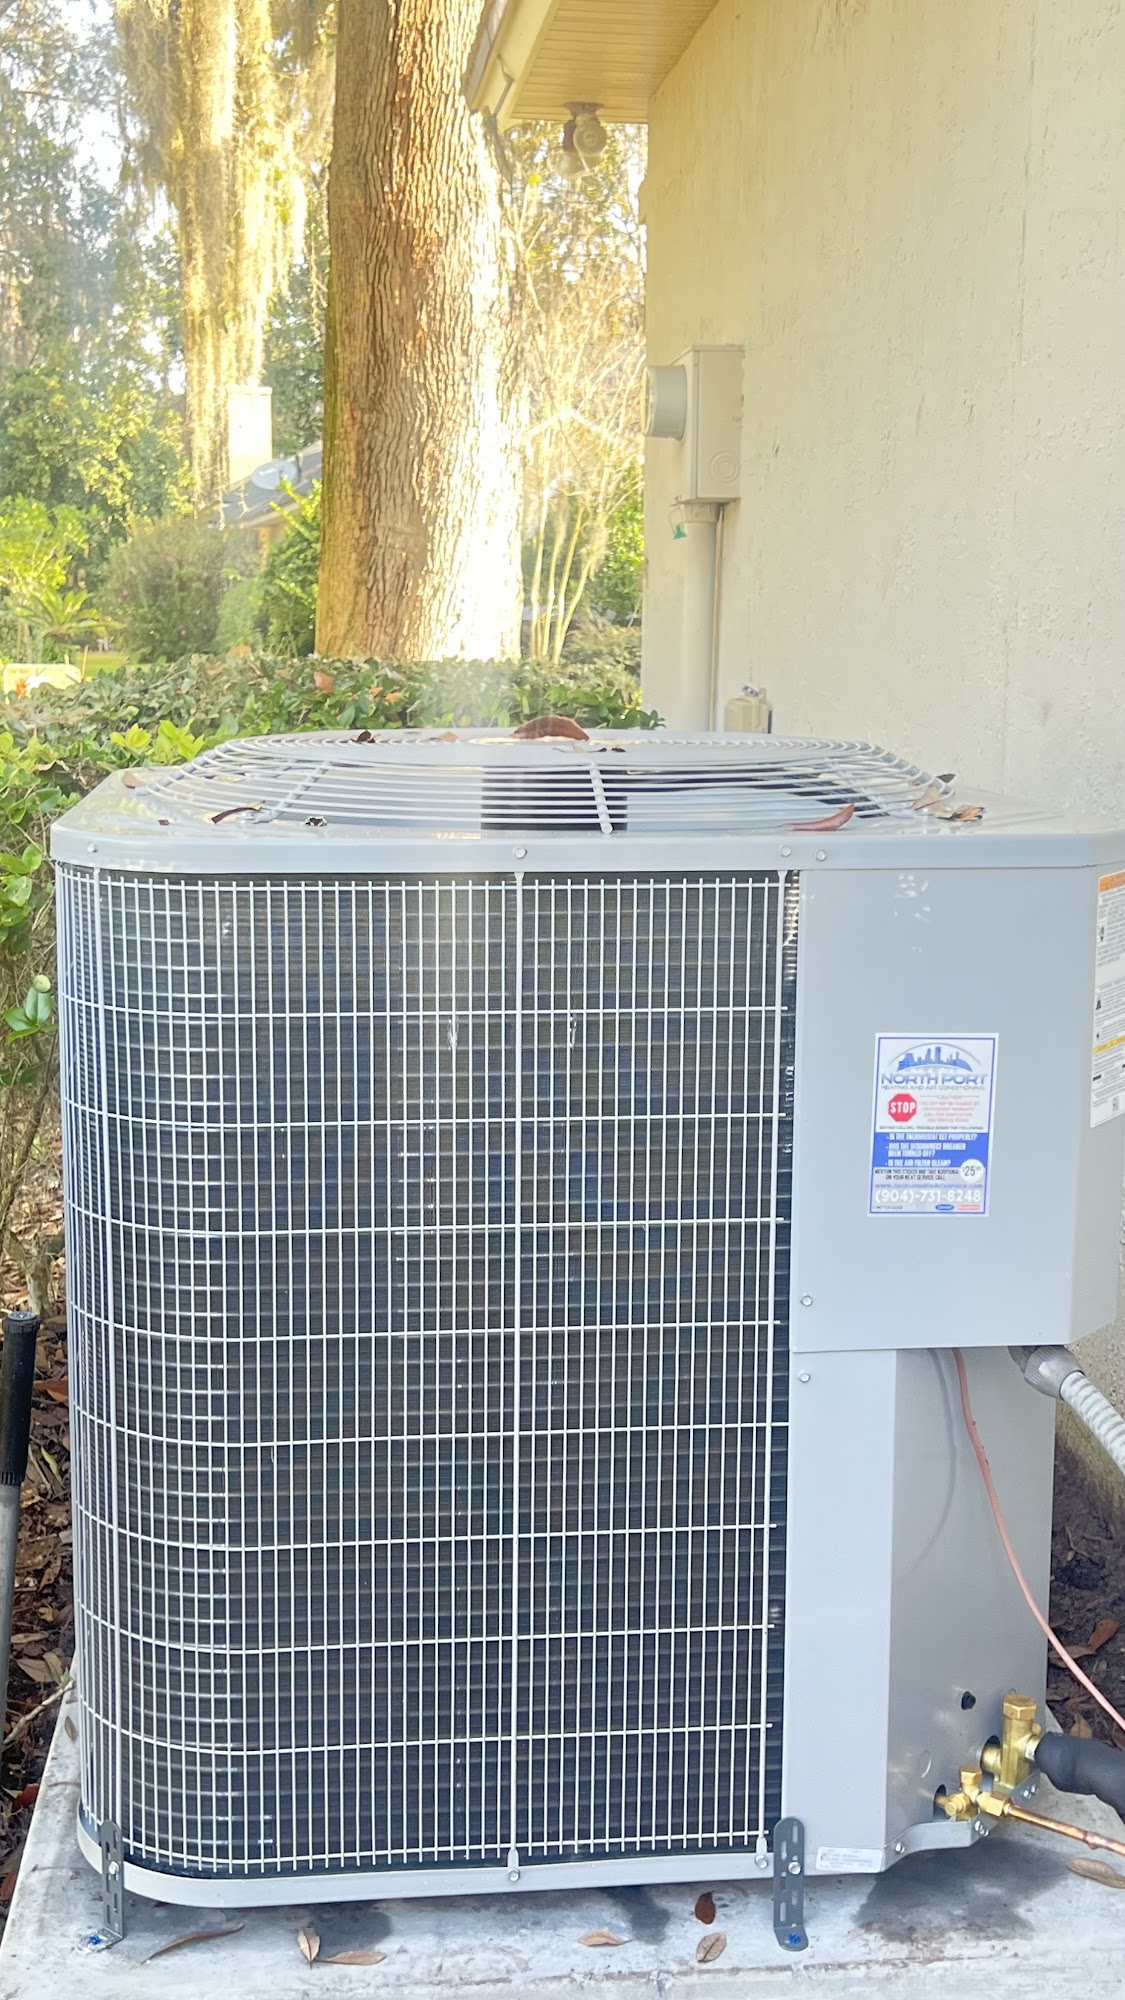 NorthPort Heating and Air Conditioning